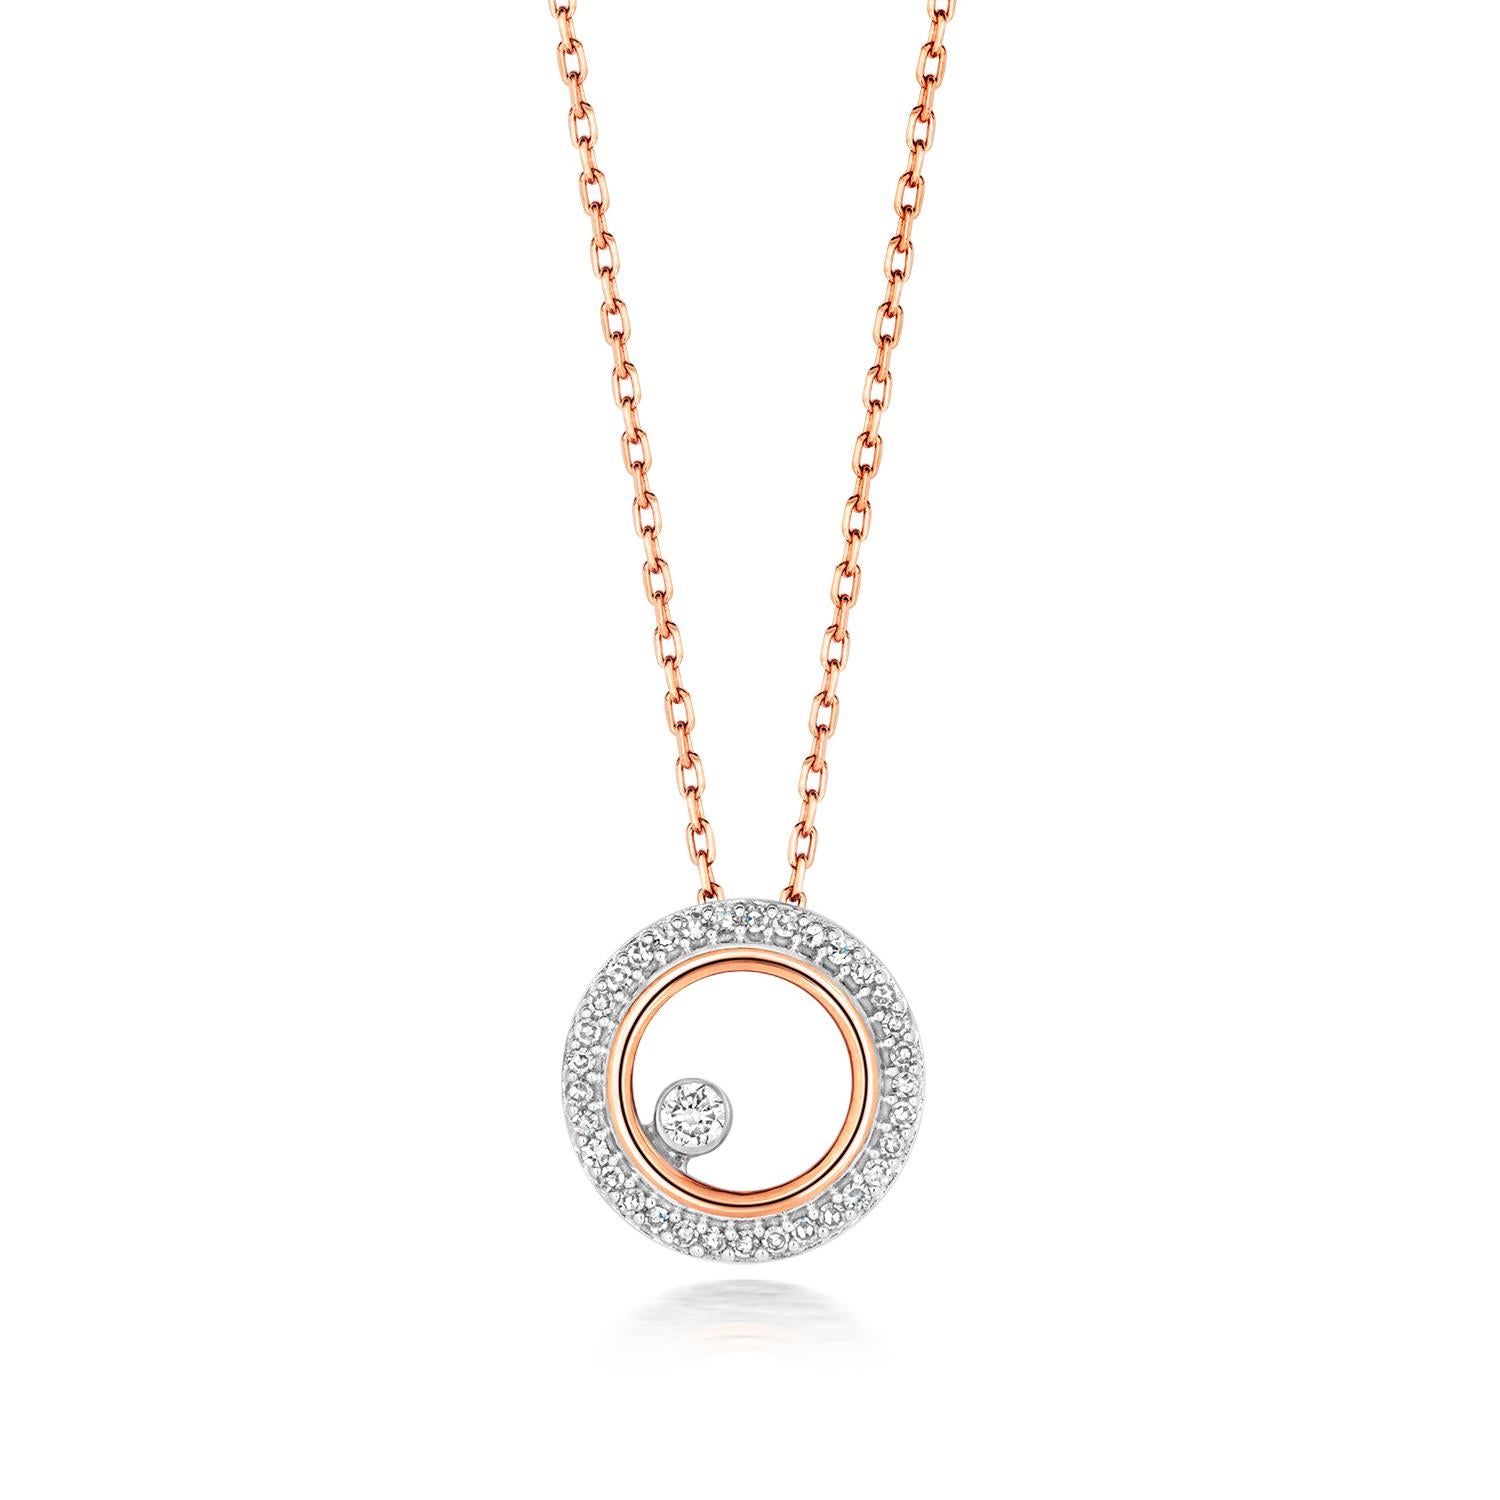 DIAMOND NECKLACE CIRCLE

9CT R/G H SC I1 0.08CT

Weight: 1.5g

Number Of Stones:34

Total Carates:0.080